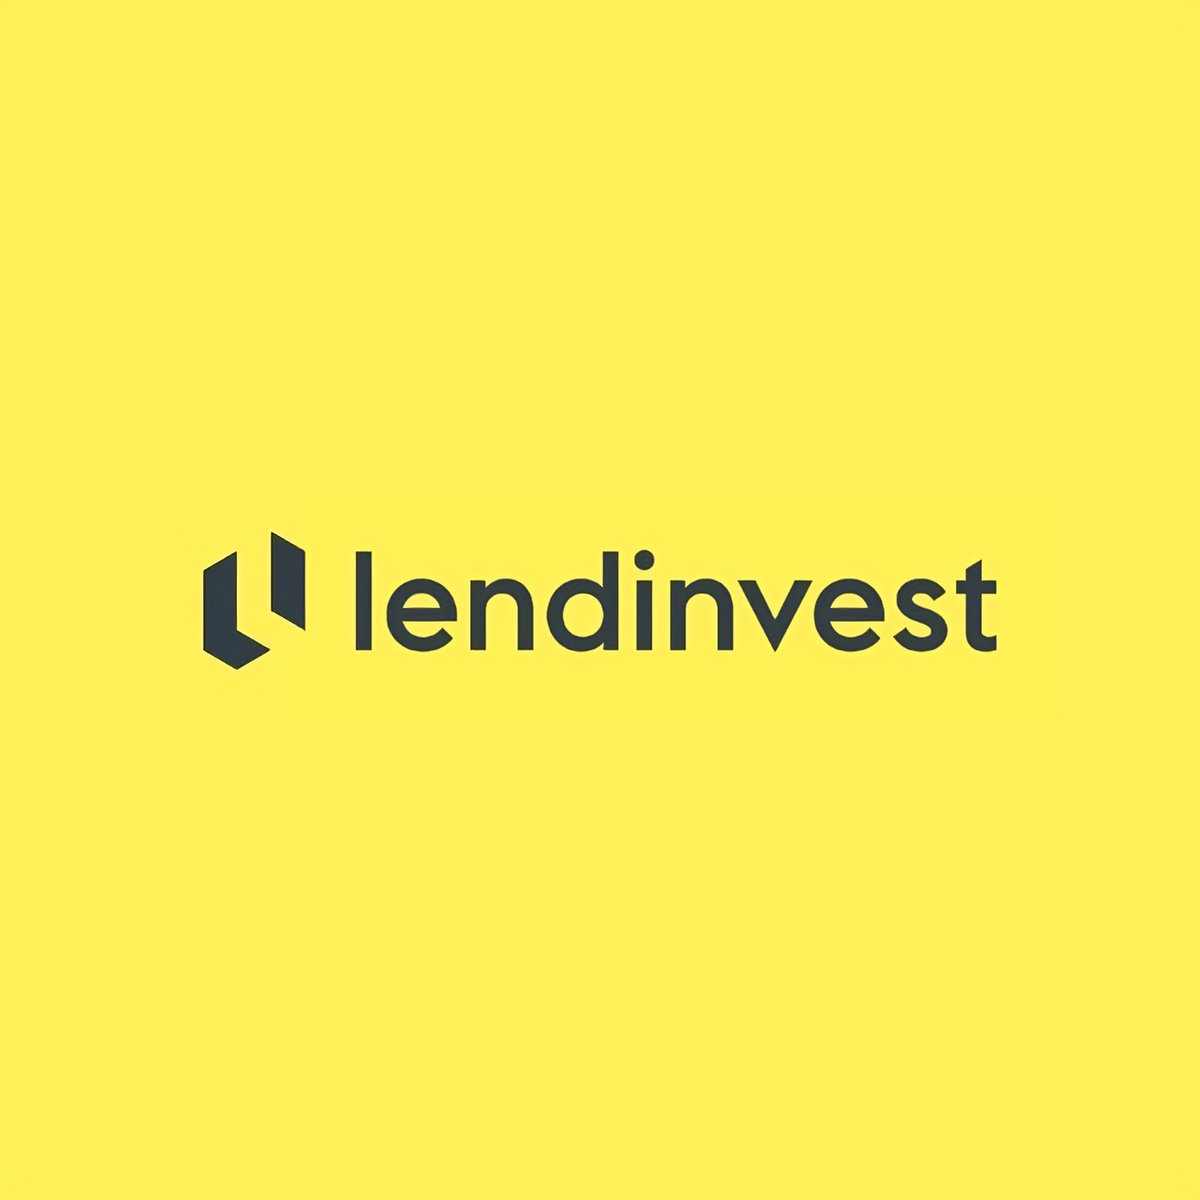 🚀 LendInvest #EarlyCareers Programme! 🏴 📅 Deadline Approaching: Apply Now! 📍 #Glasgow 💰 Competitive Salary + Bonus 🏢 Hybrid Work Gain hands-on experience & Level 3 Qualification in Property Finance. No Experience Needed! Apply now!👇 vist.ly/xs4p